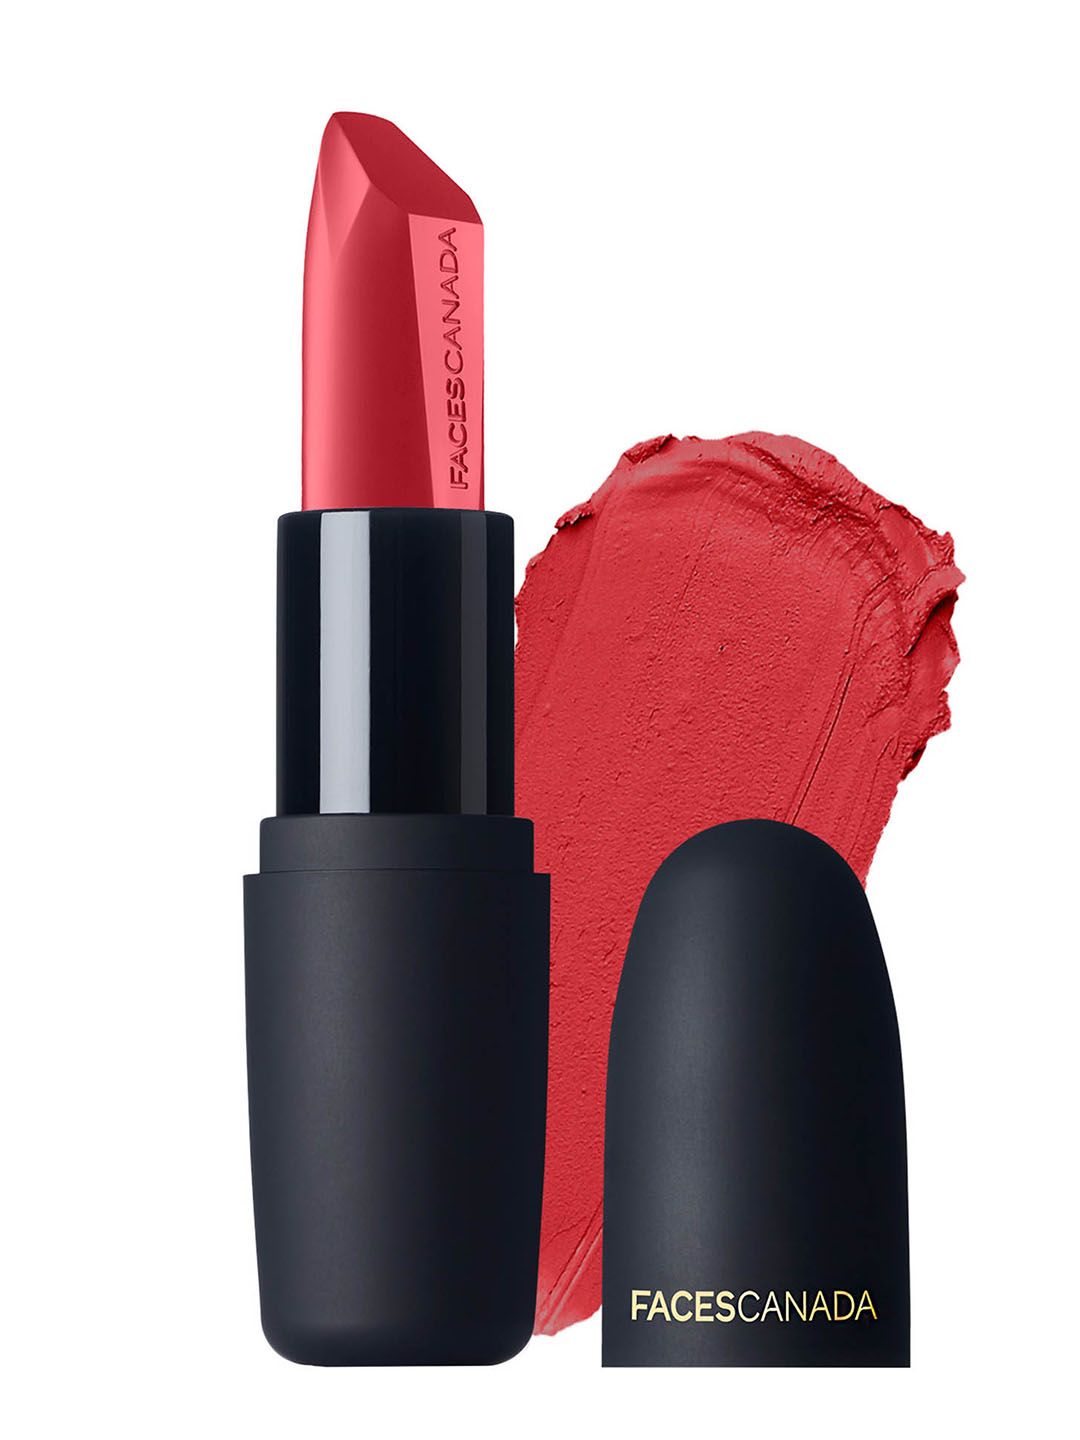 FACES CANADA Weightless Matte Finish Lipstick Pink Sugar 04 4gm Price in India